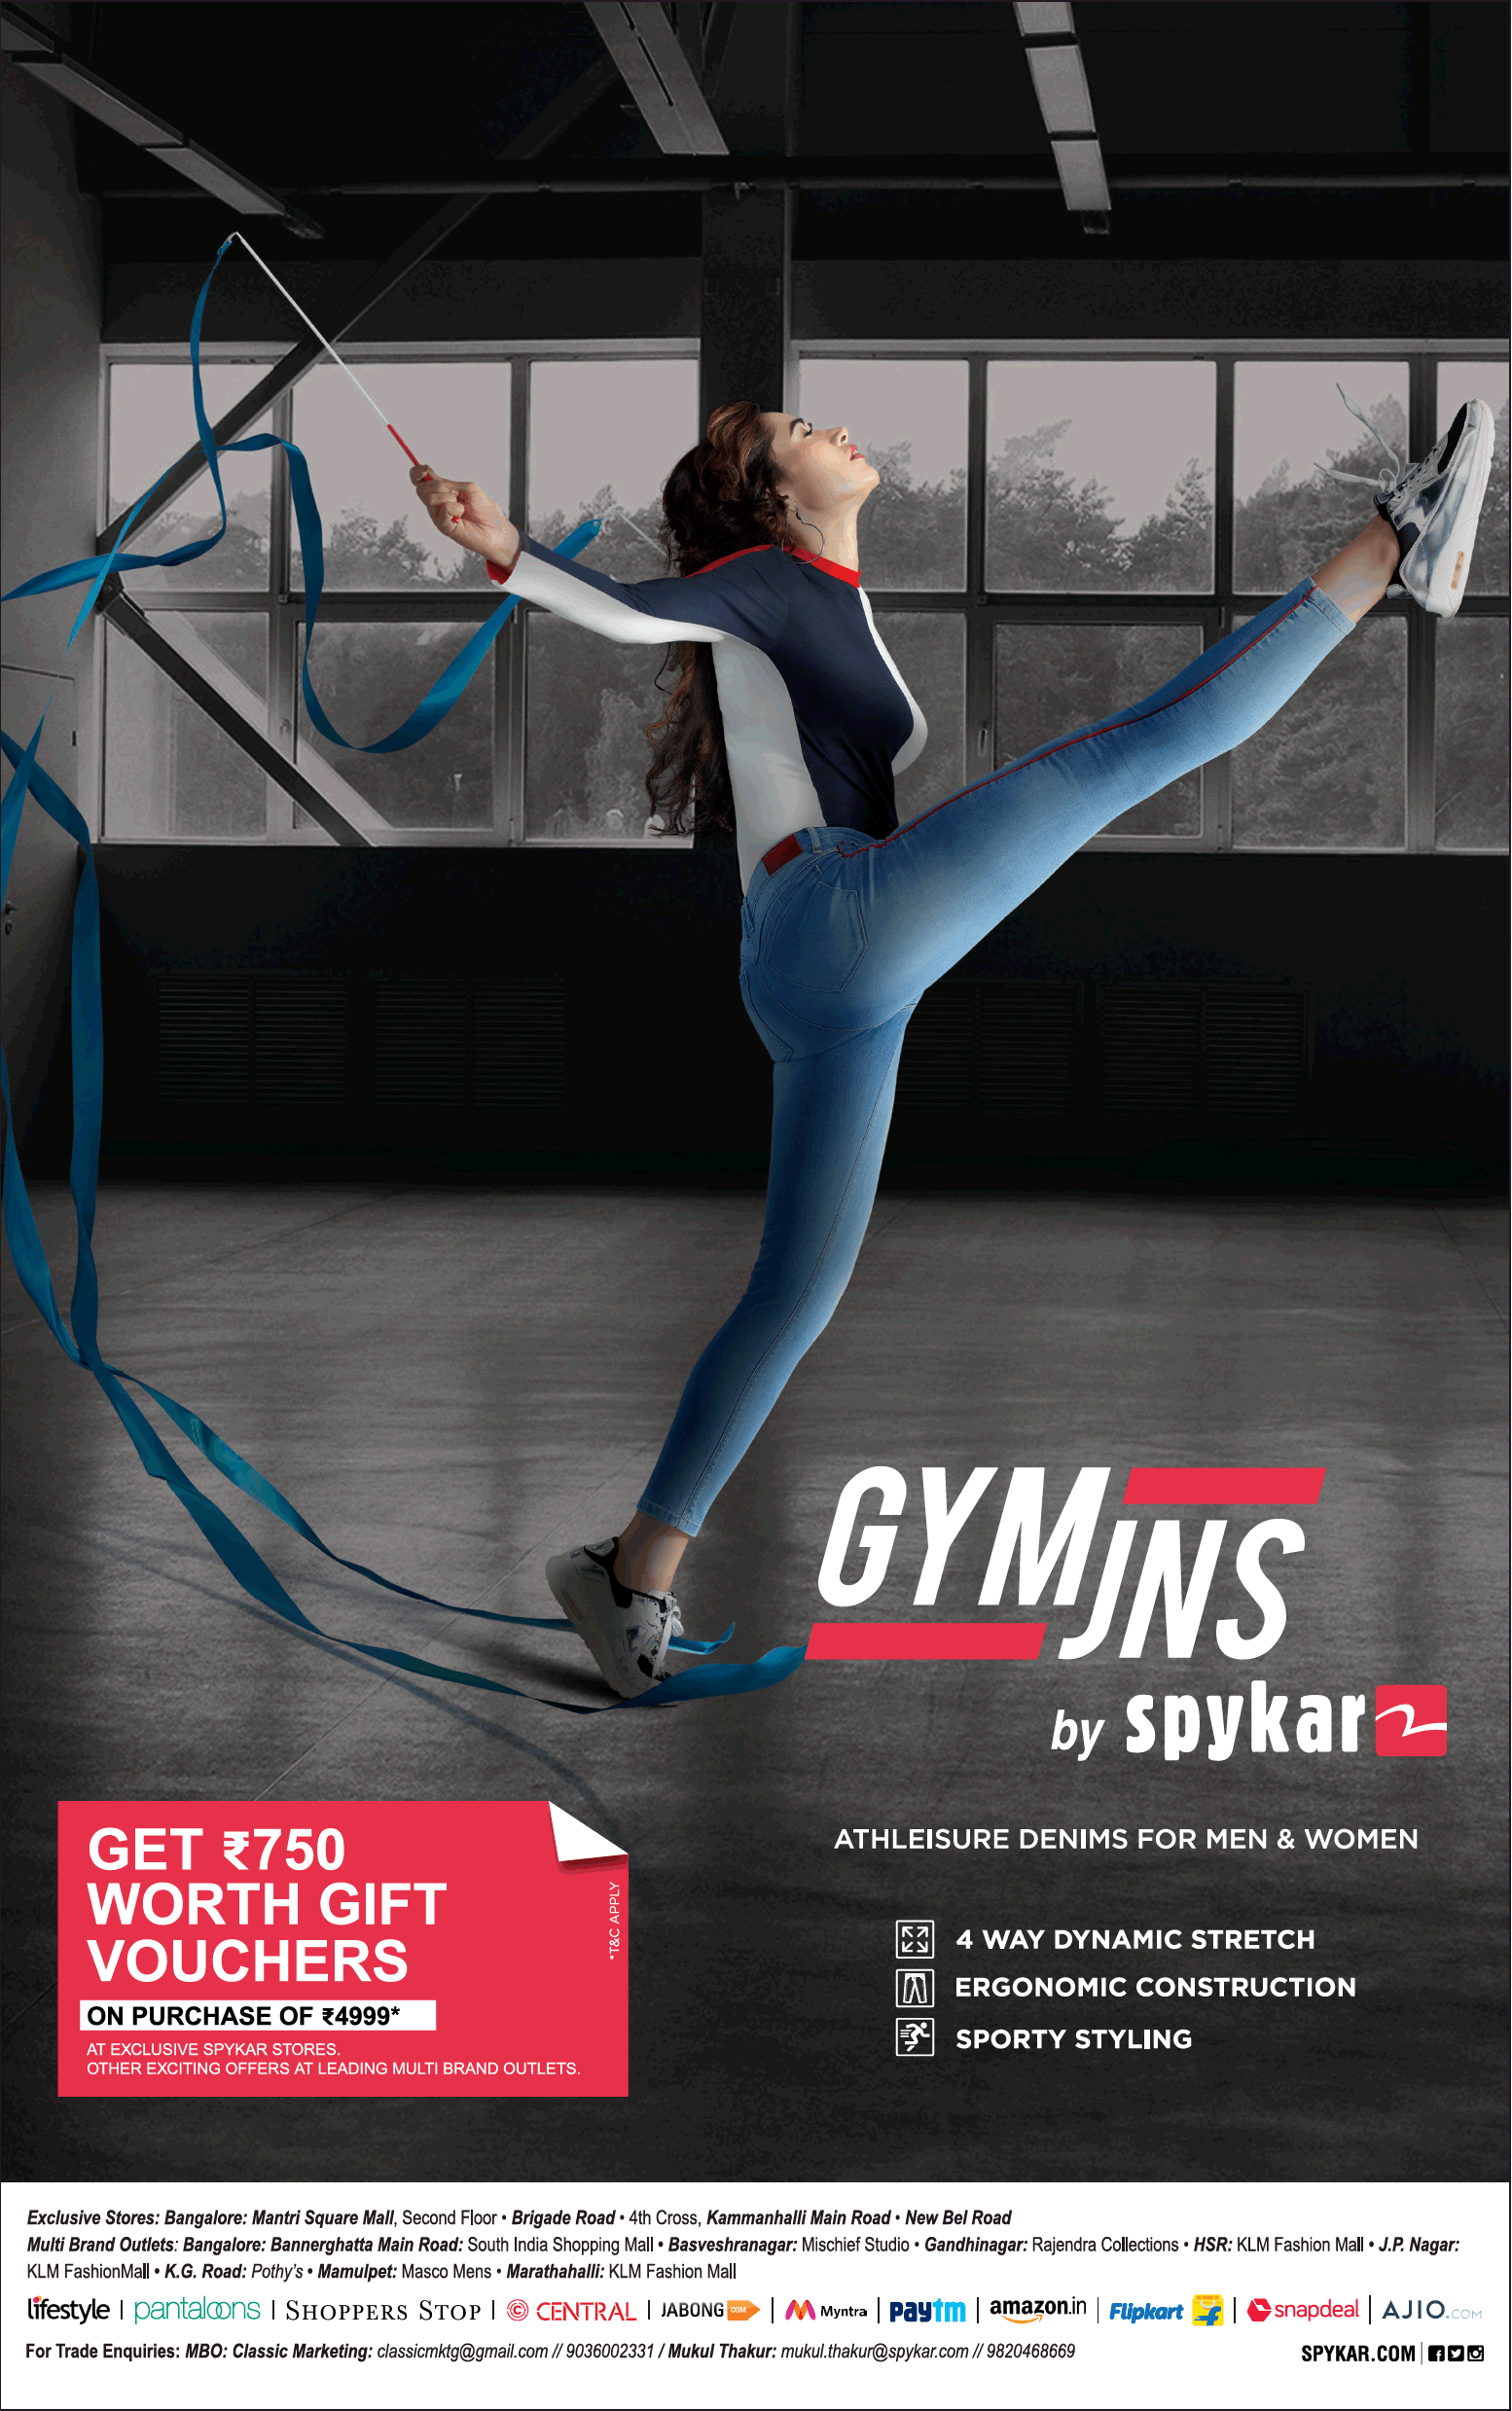 gym-jeans-by-spykar-get-rs-750-worth-gift-vouchers-ad-bangalore-times-03-05-2019.png